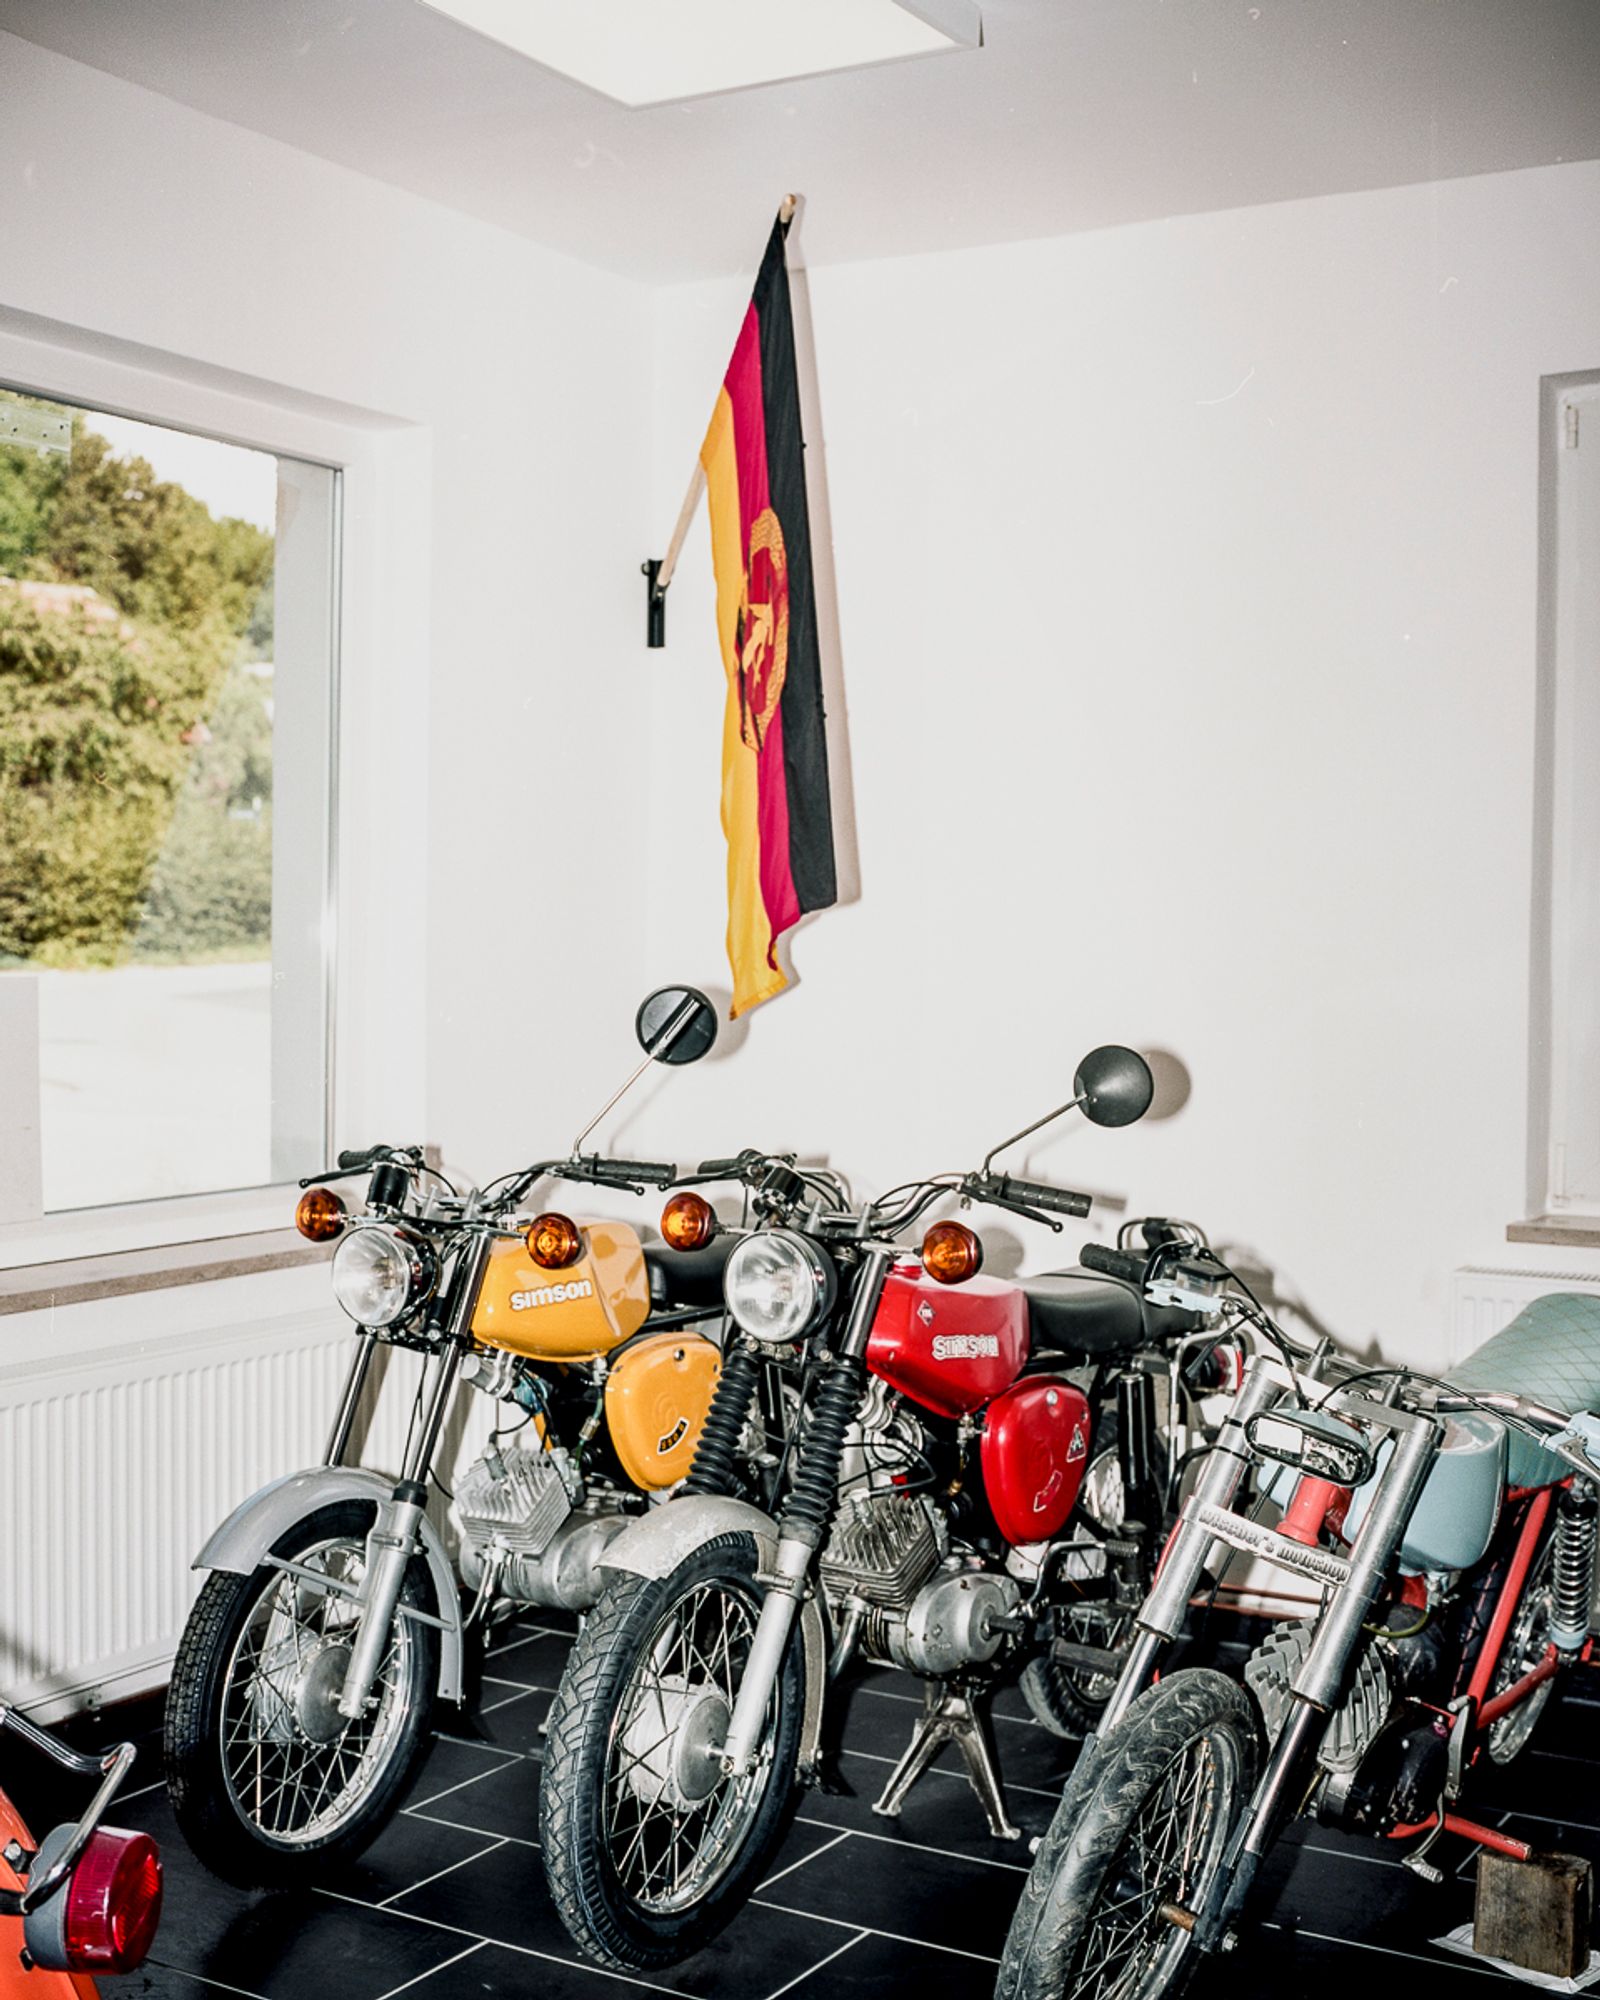 © Paweł Starzec - "This heritage is my job. My workshop deals only with DDR-made motorbikes."